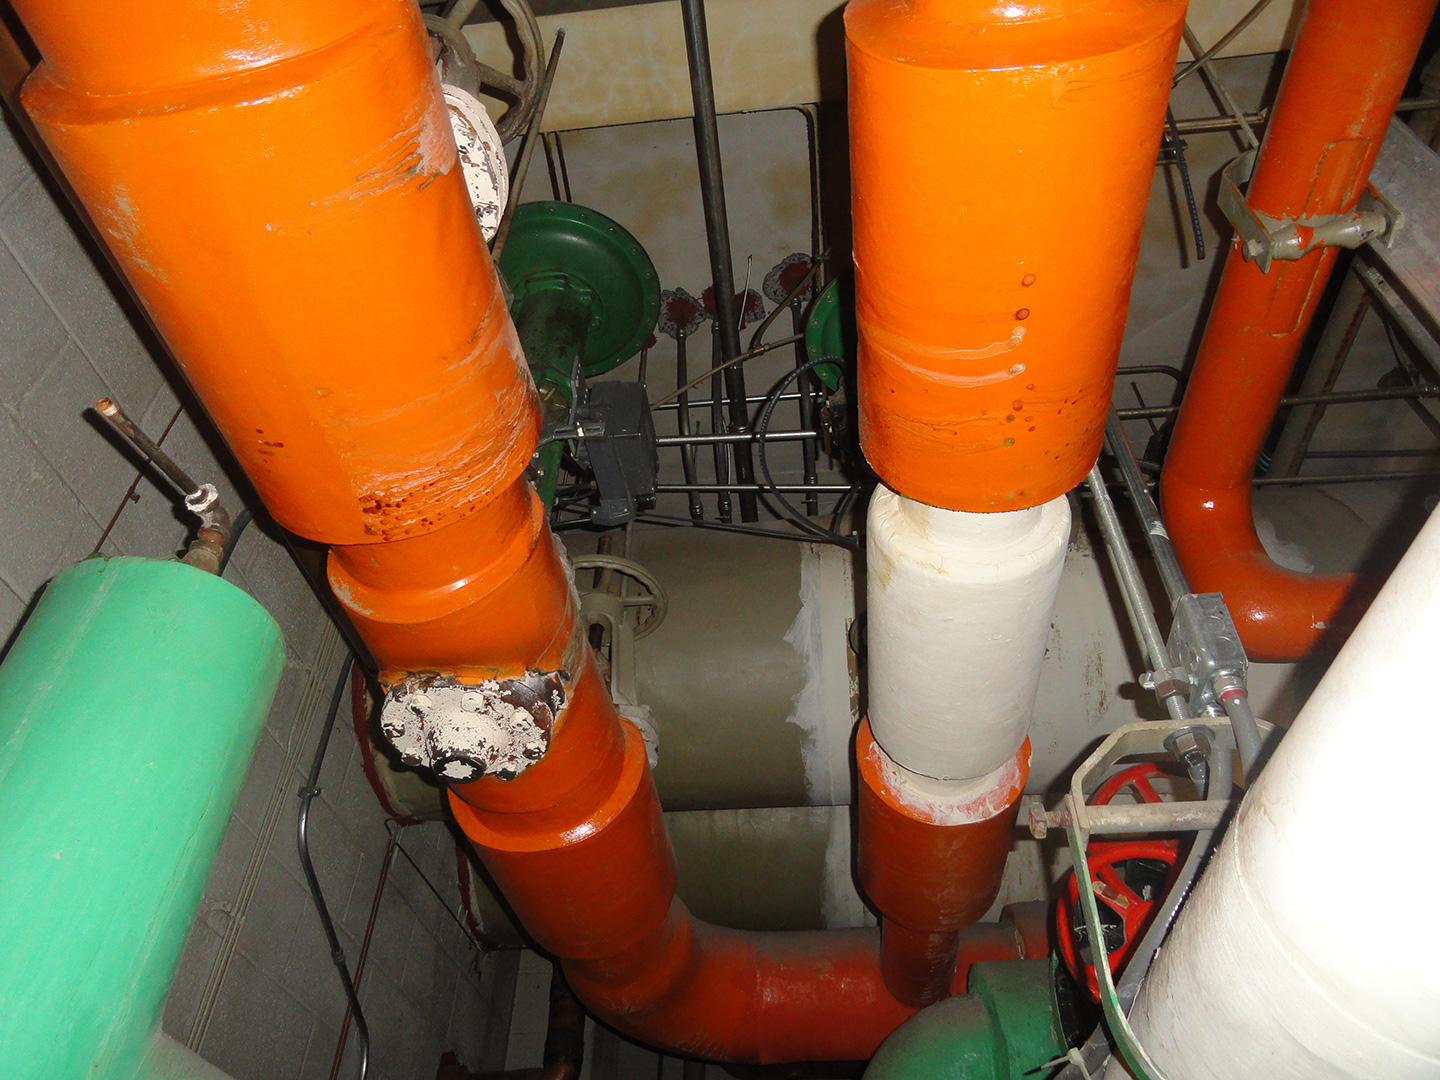 Hydronic piping and valves from a 1960s hospital tower